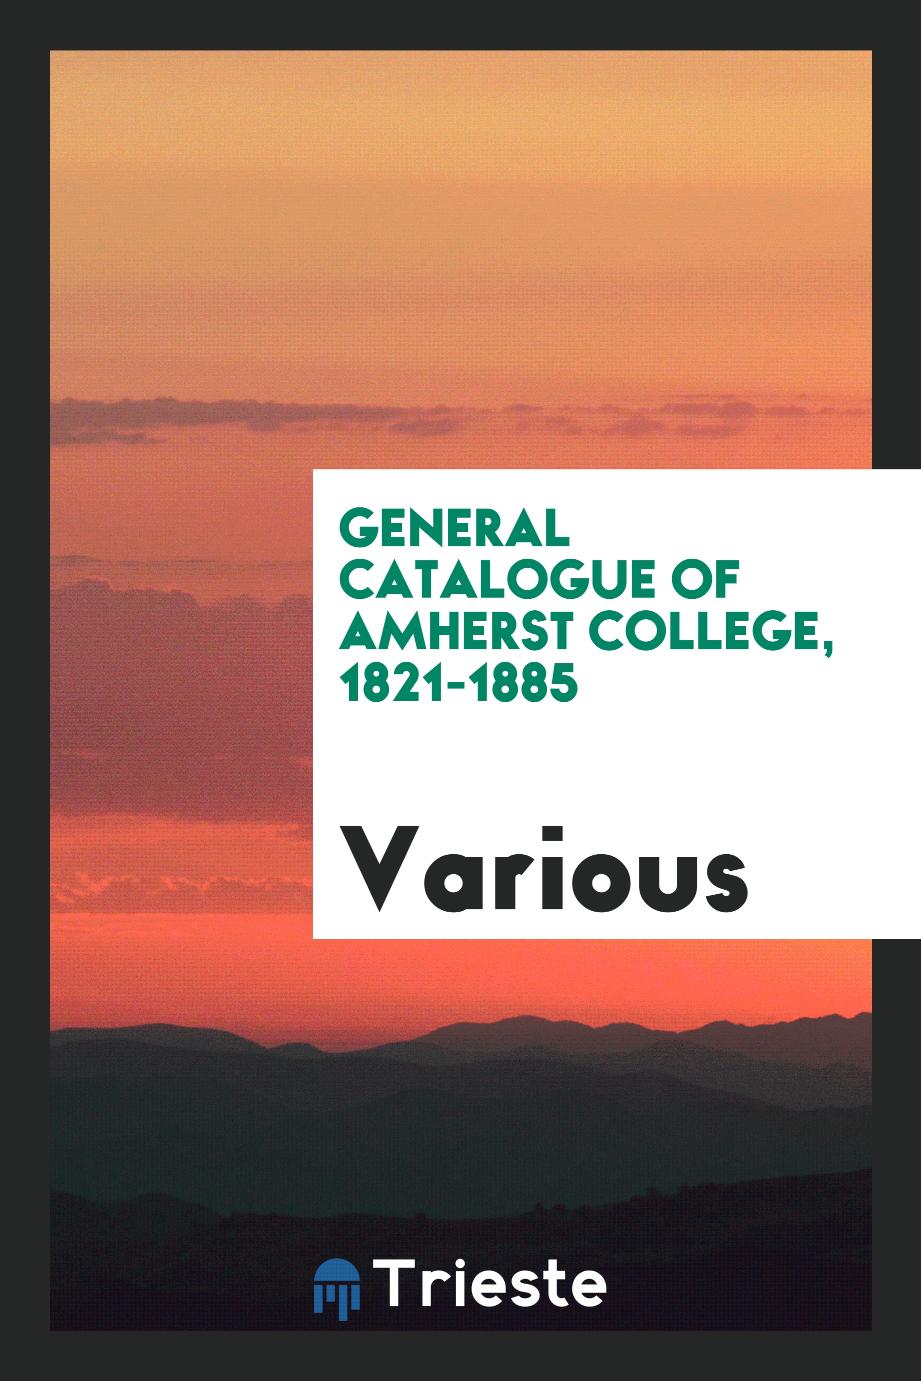 General Catalogue of Amherst College, 1821-1885